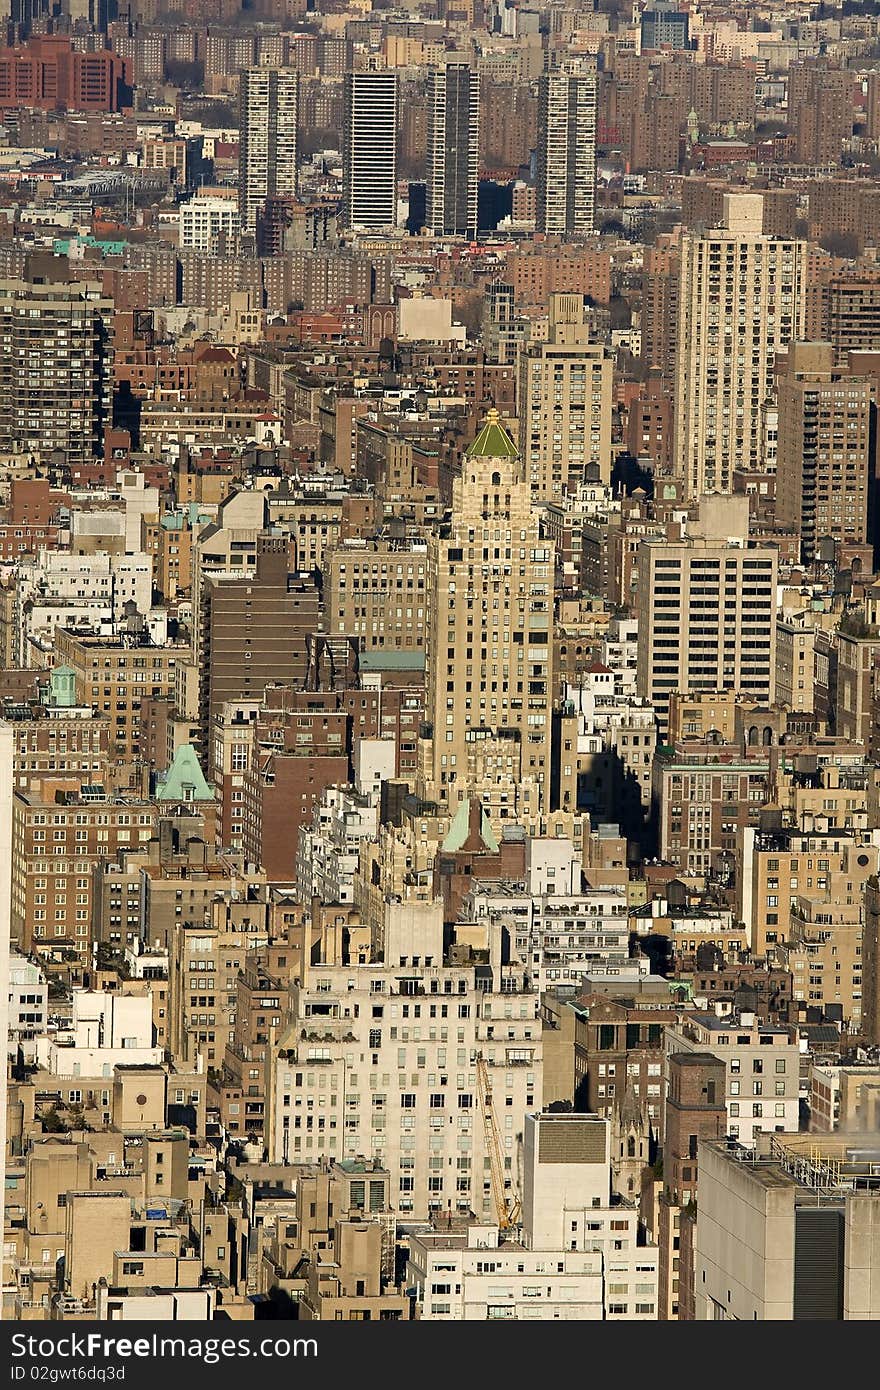 View of a Sea of Buildings in a Metropolis: New York city.